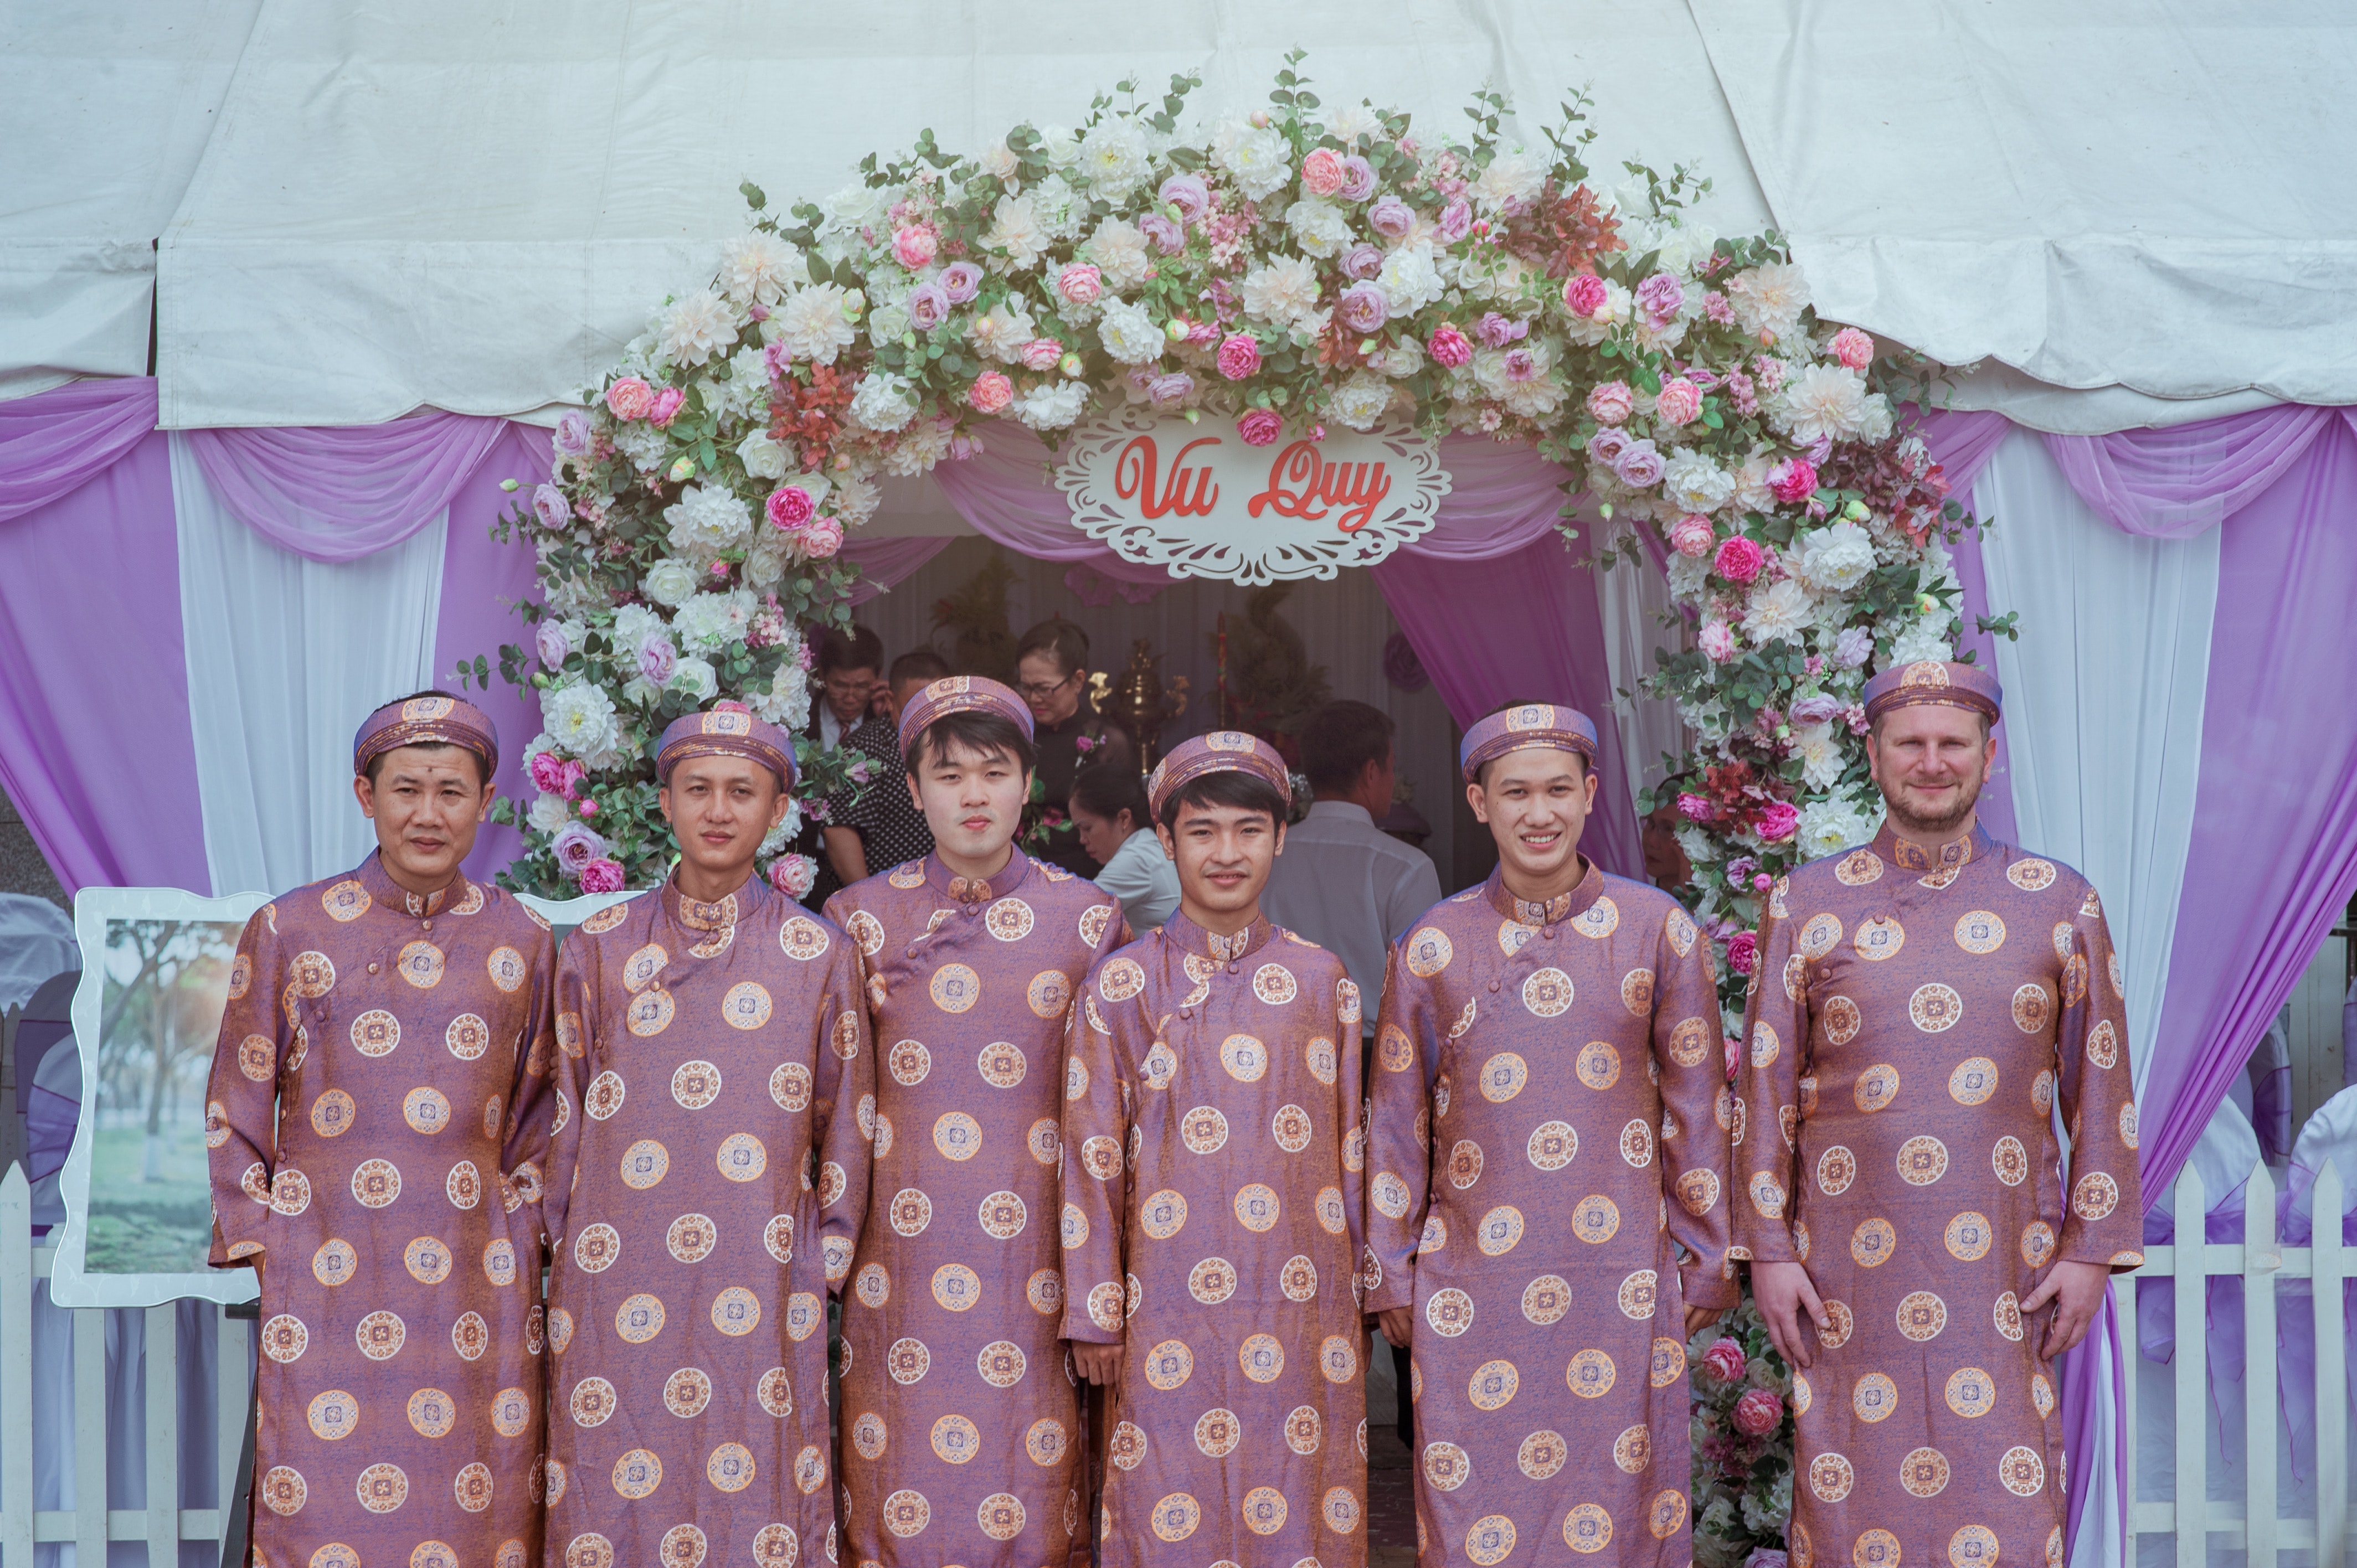 Free photo: Group of Men Wearing Pink Robes - Adult, Man, Together ...